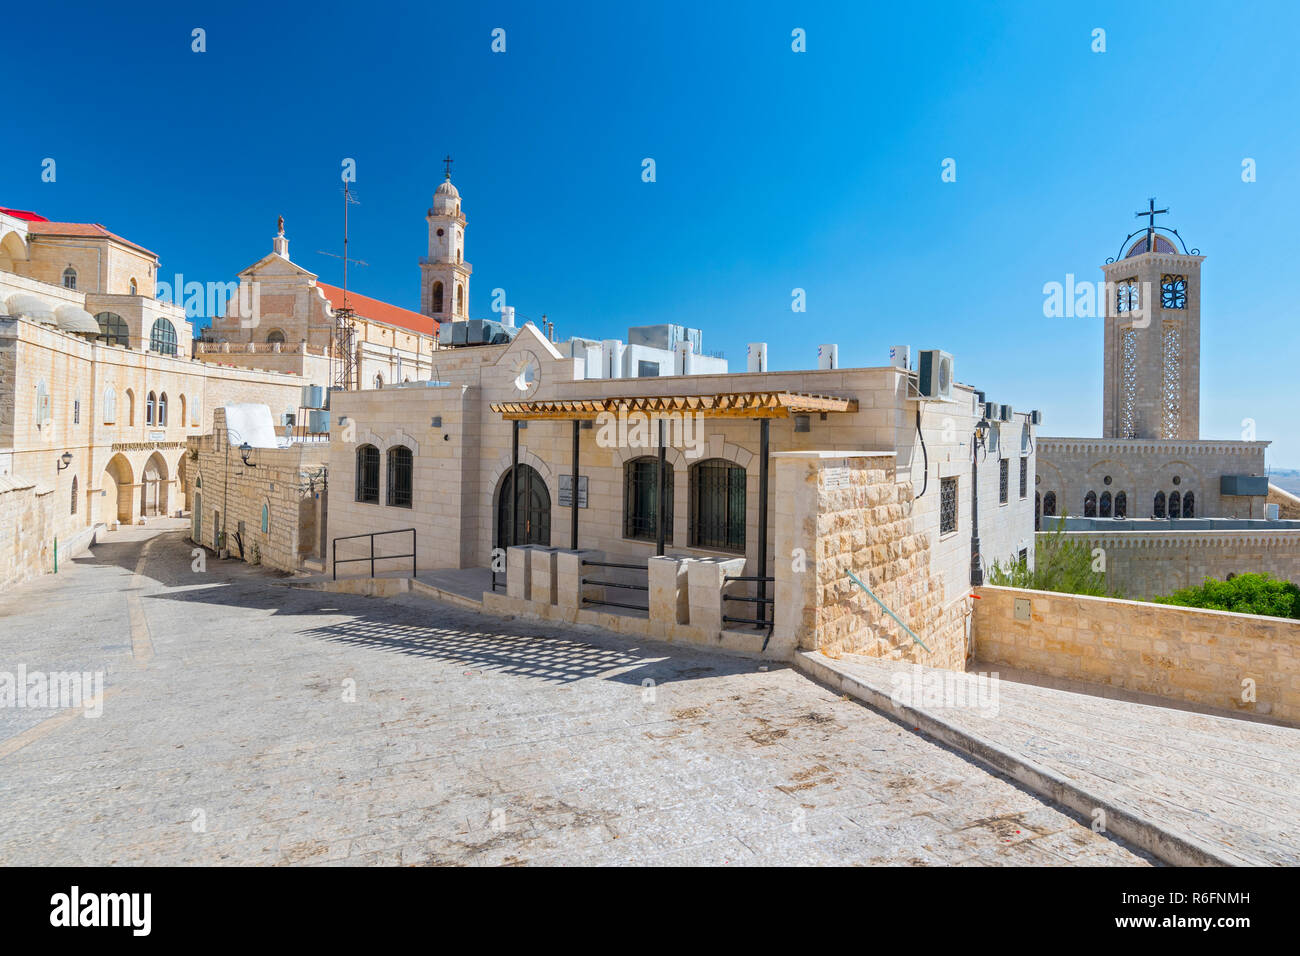 View On The Old Street And Greek Byzantine Catholic Church In Bethlehem Palestinian Territories Israel Stock Photo